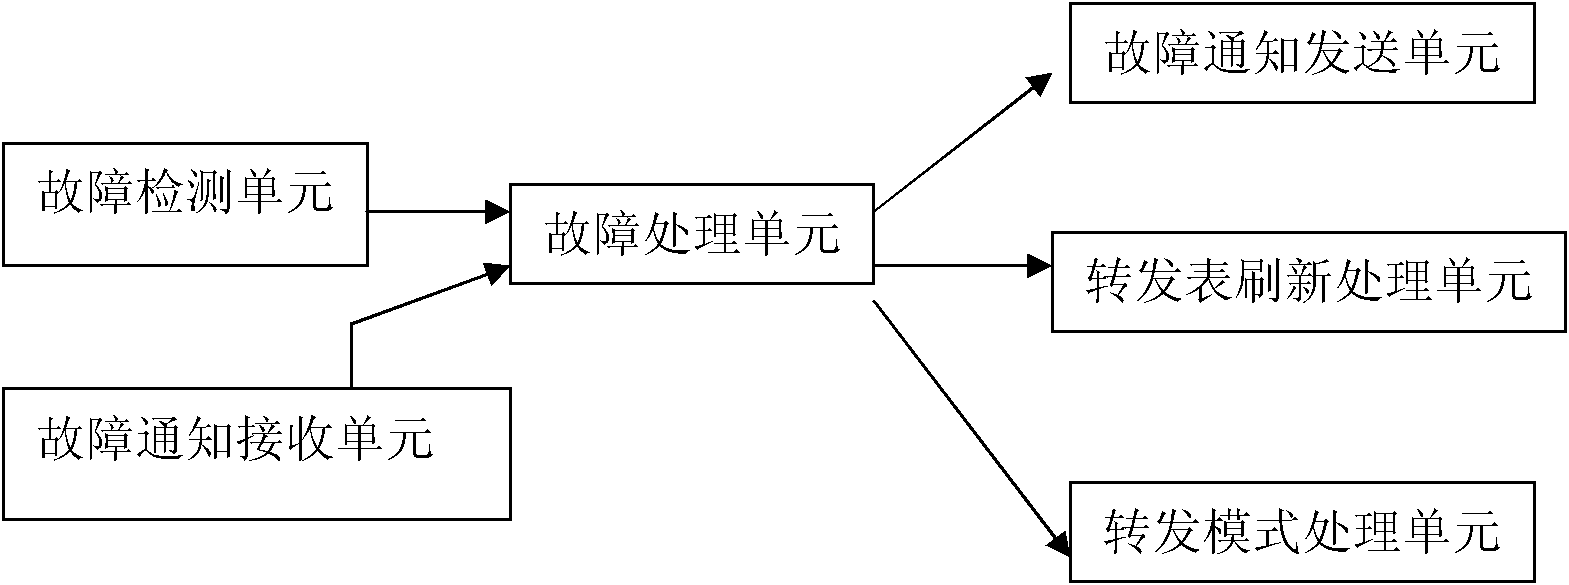 Handover processing method in case of failed Ethernet automatic protection switching (EAPS) looped network link and switching equipment